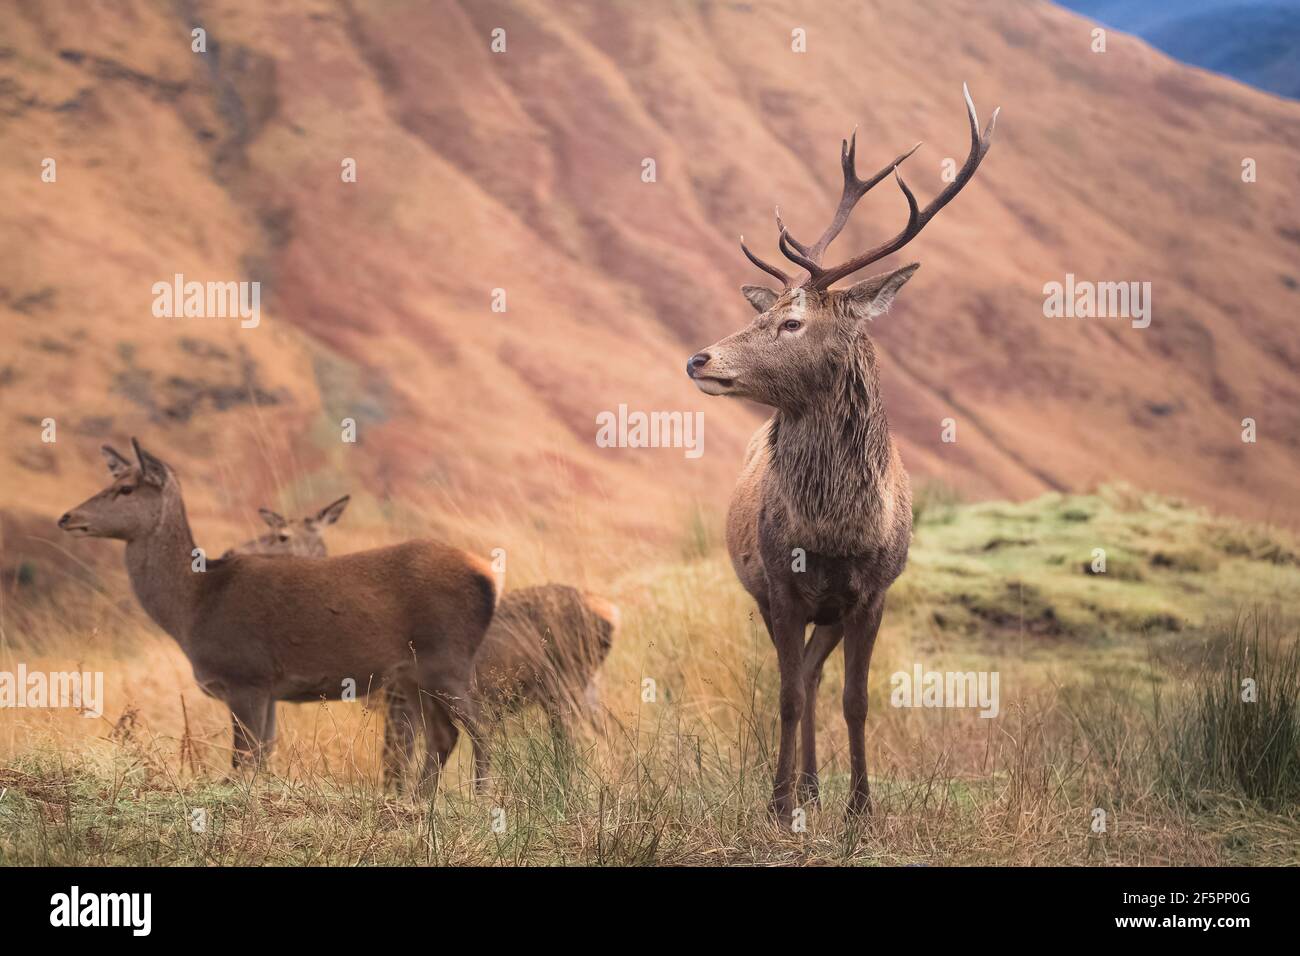 Wildlife portrait of a Scottish Red Deer (Cervus elaphus scoticus) stag in the mountain countryside of Glen Etive in the Scottish Highlands, Scotland. Stock Photo